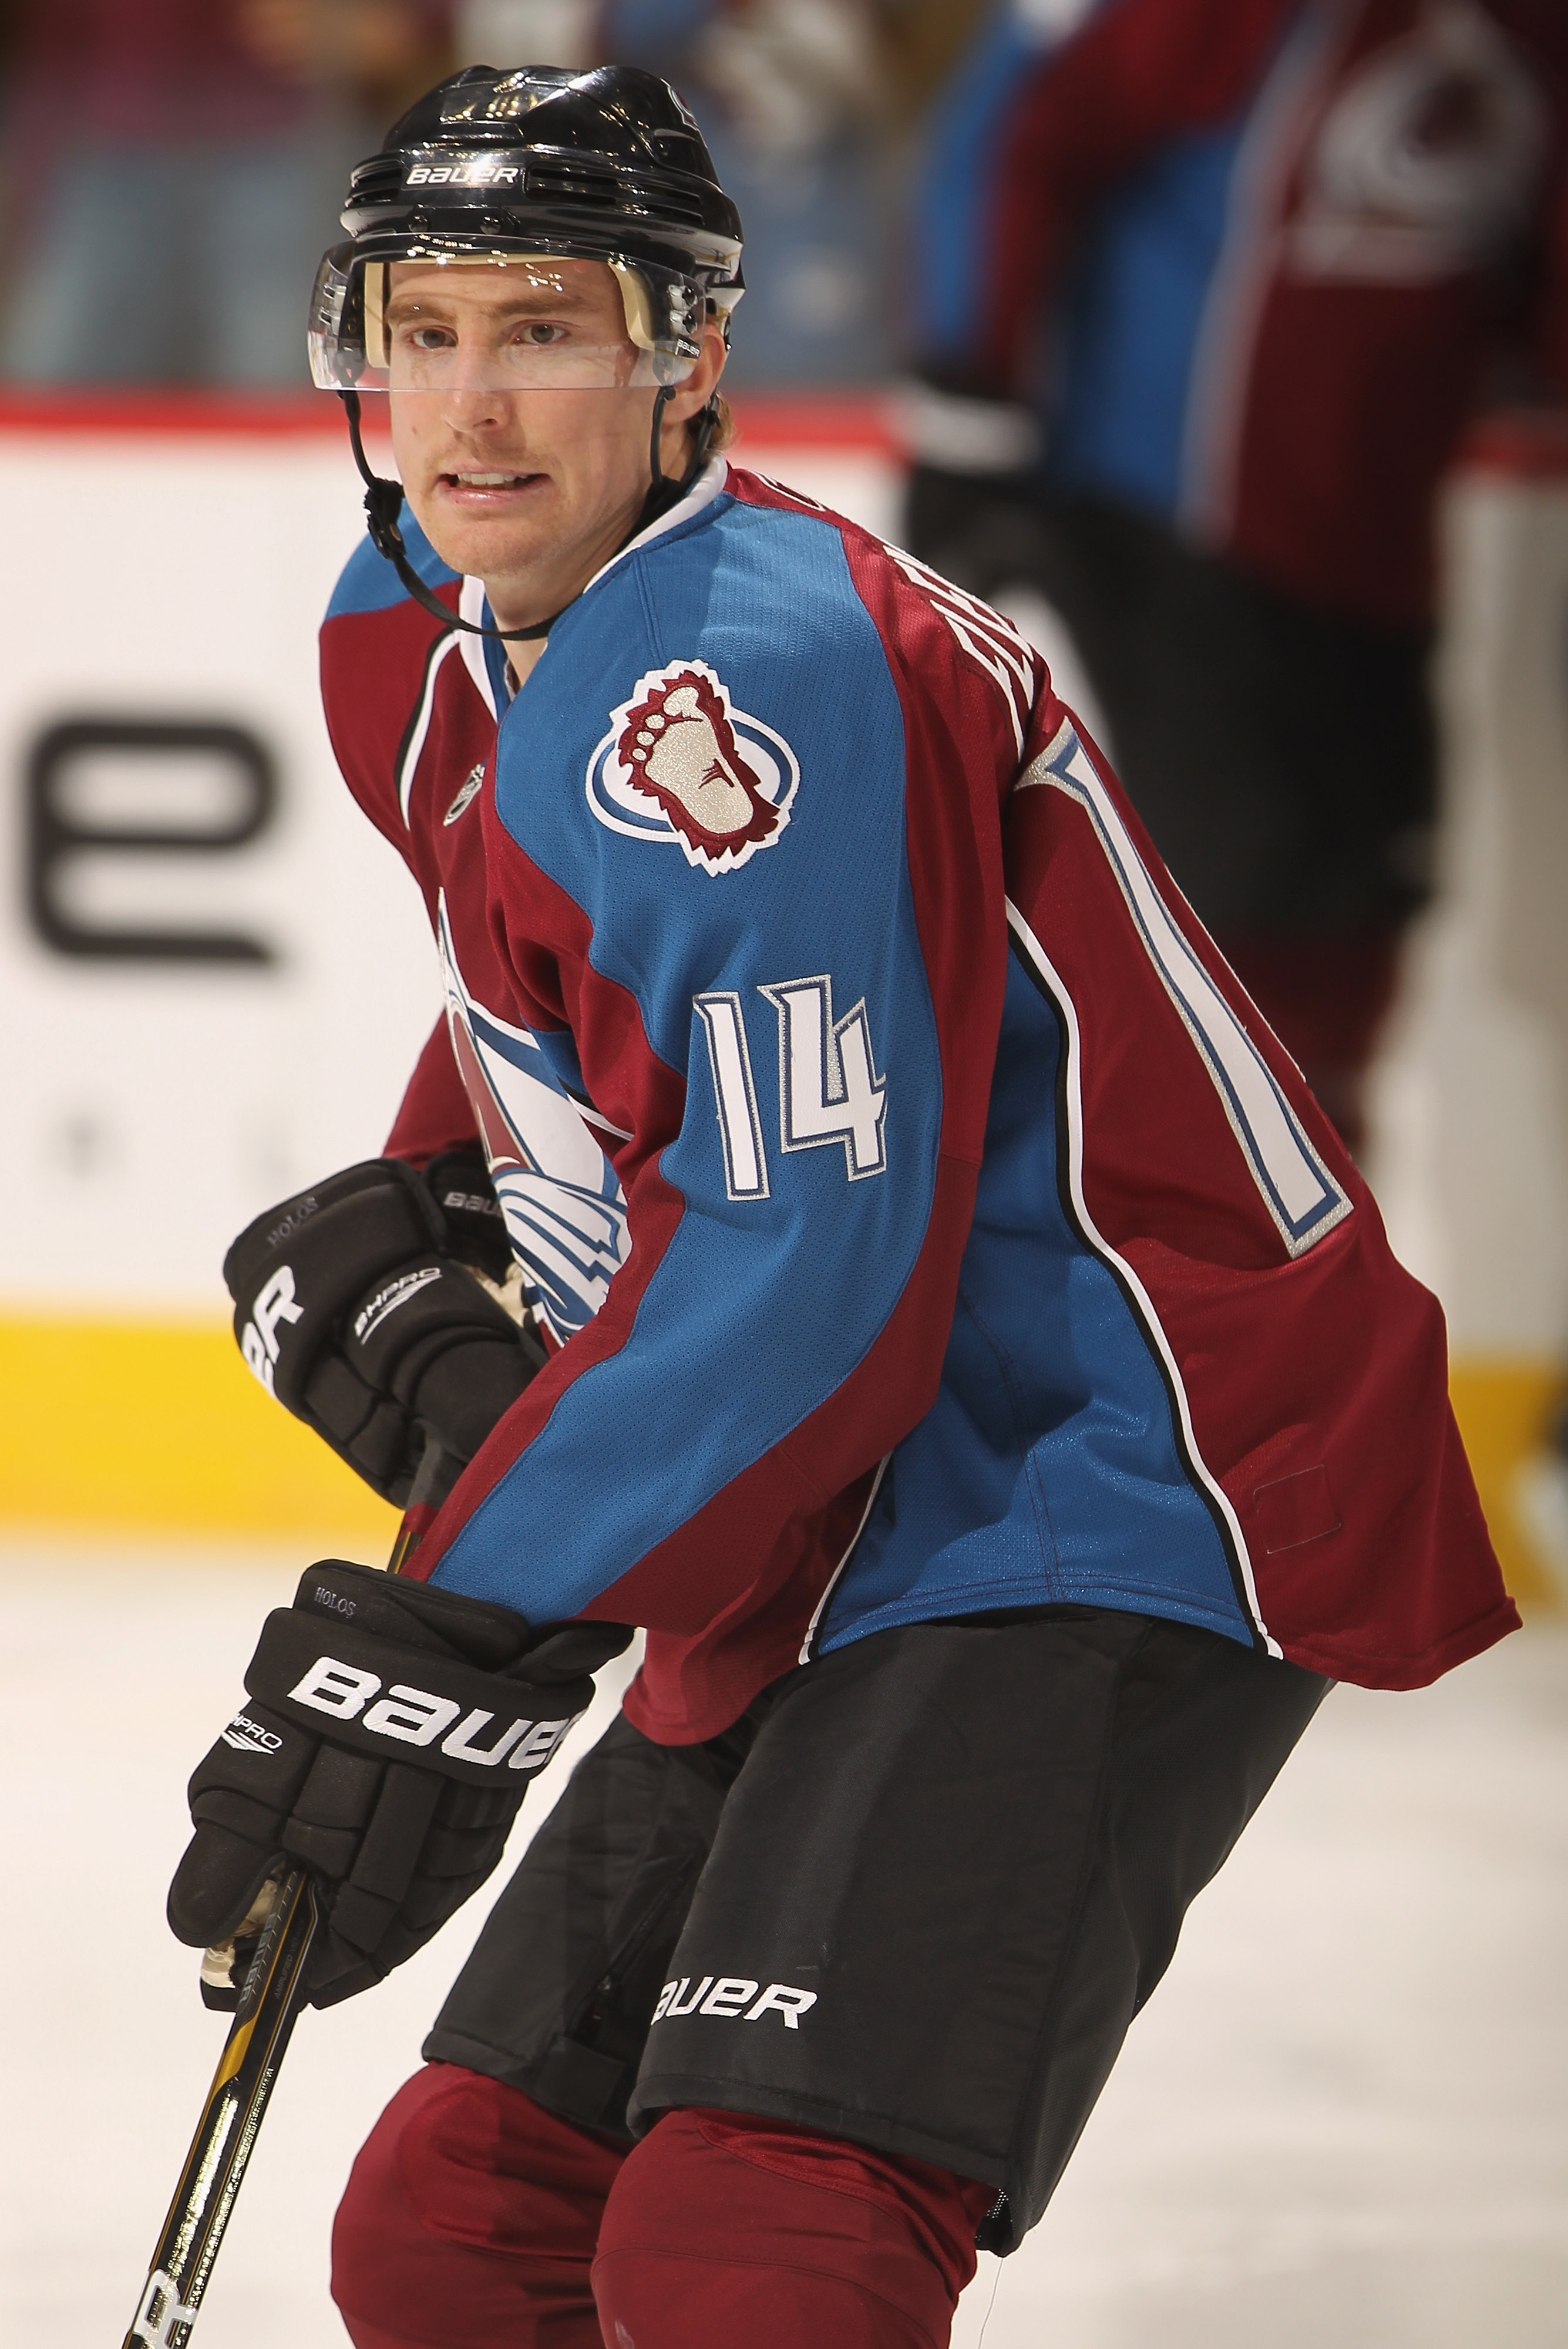 DENVER - DECEMBER 23:  Tomas Fleischmann #14 of the Colorado Avalanche warms up prior to facing the Minnesota Wild at the Pepsi Center on December 23, 2010 in Denver, Colorado. The Wild defeated the Avalanche 3-1.  (Photo by Doug Pensinger/Getty Images)